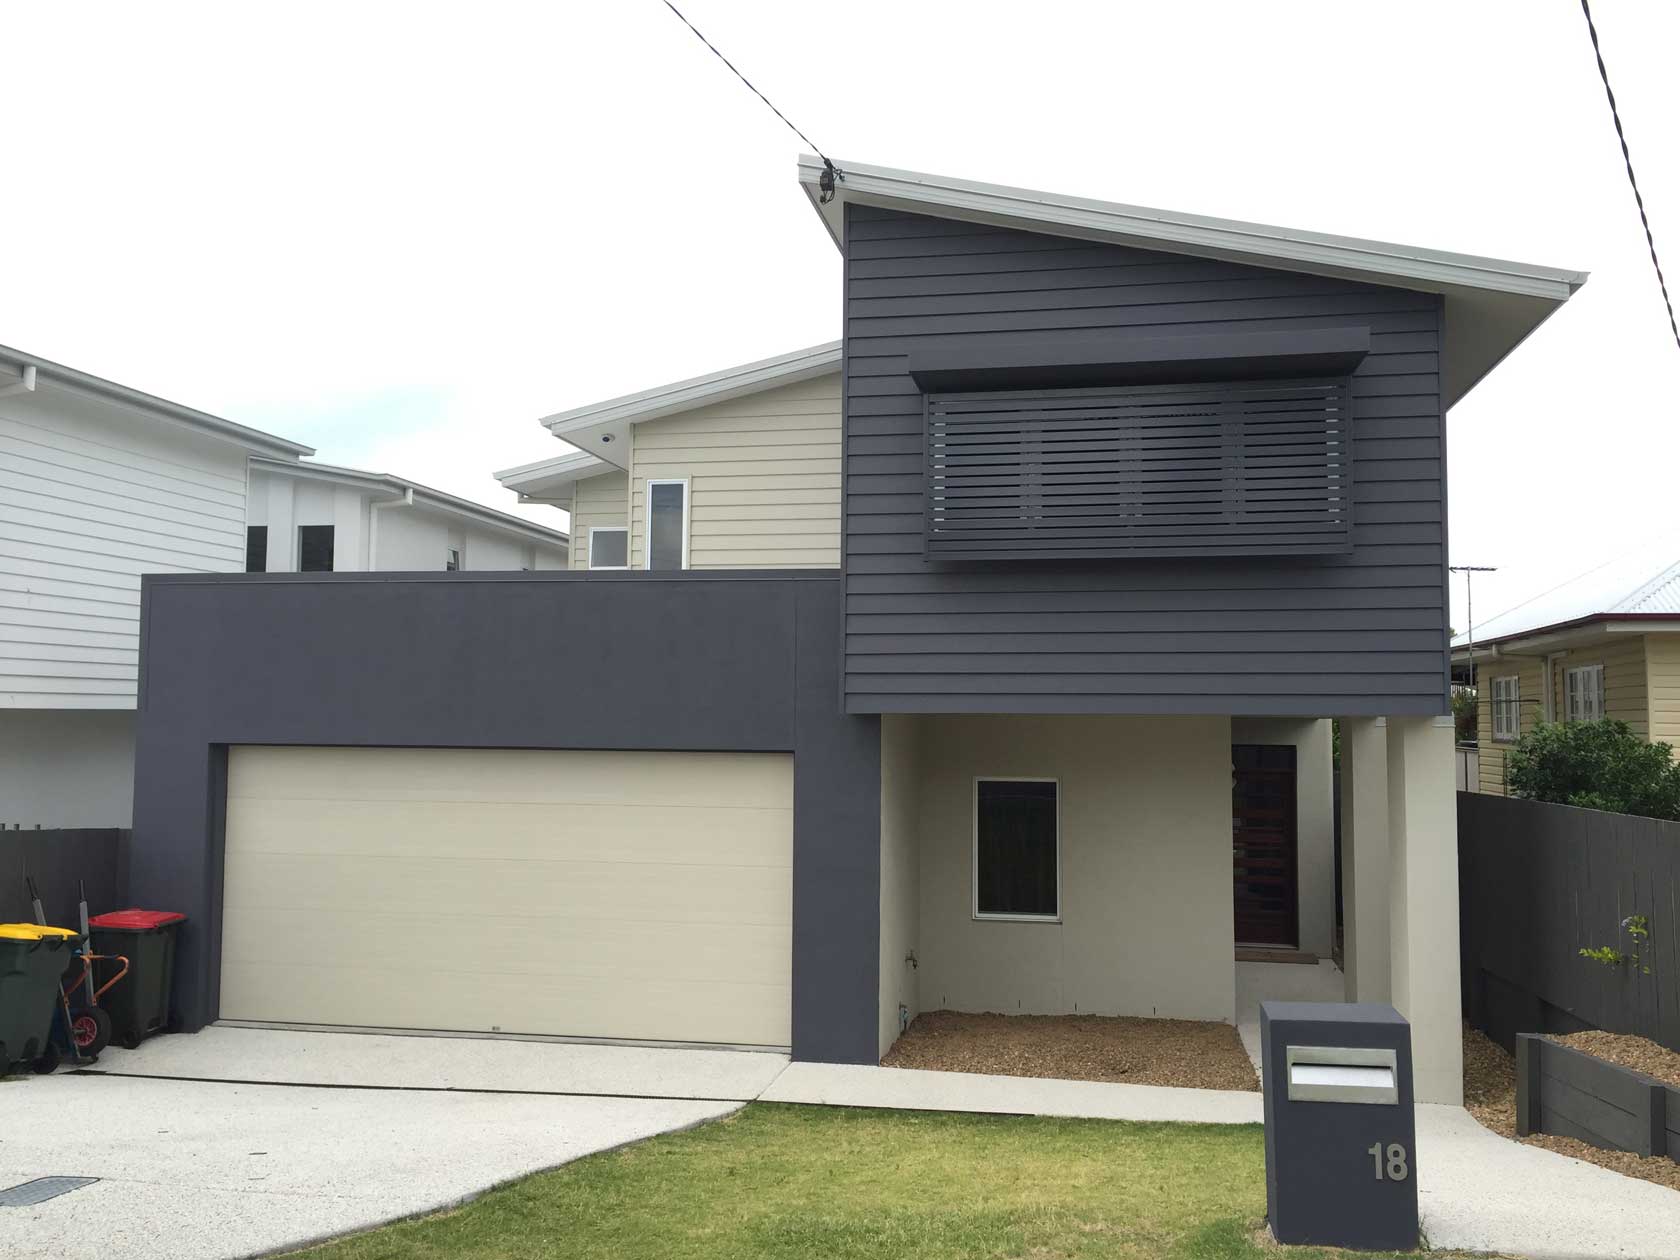 Anderson-project-diary-existing-house-navy-exterior-house-colour-scheme